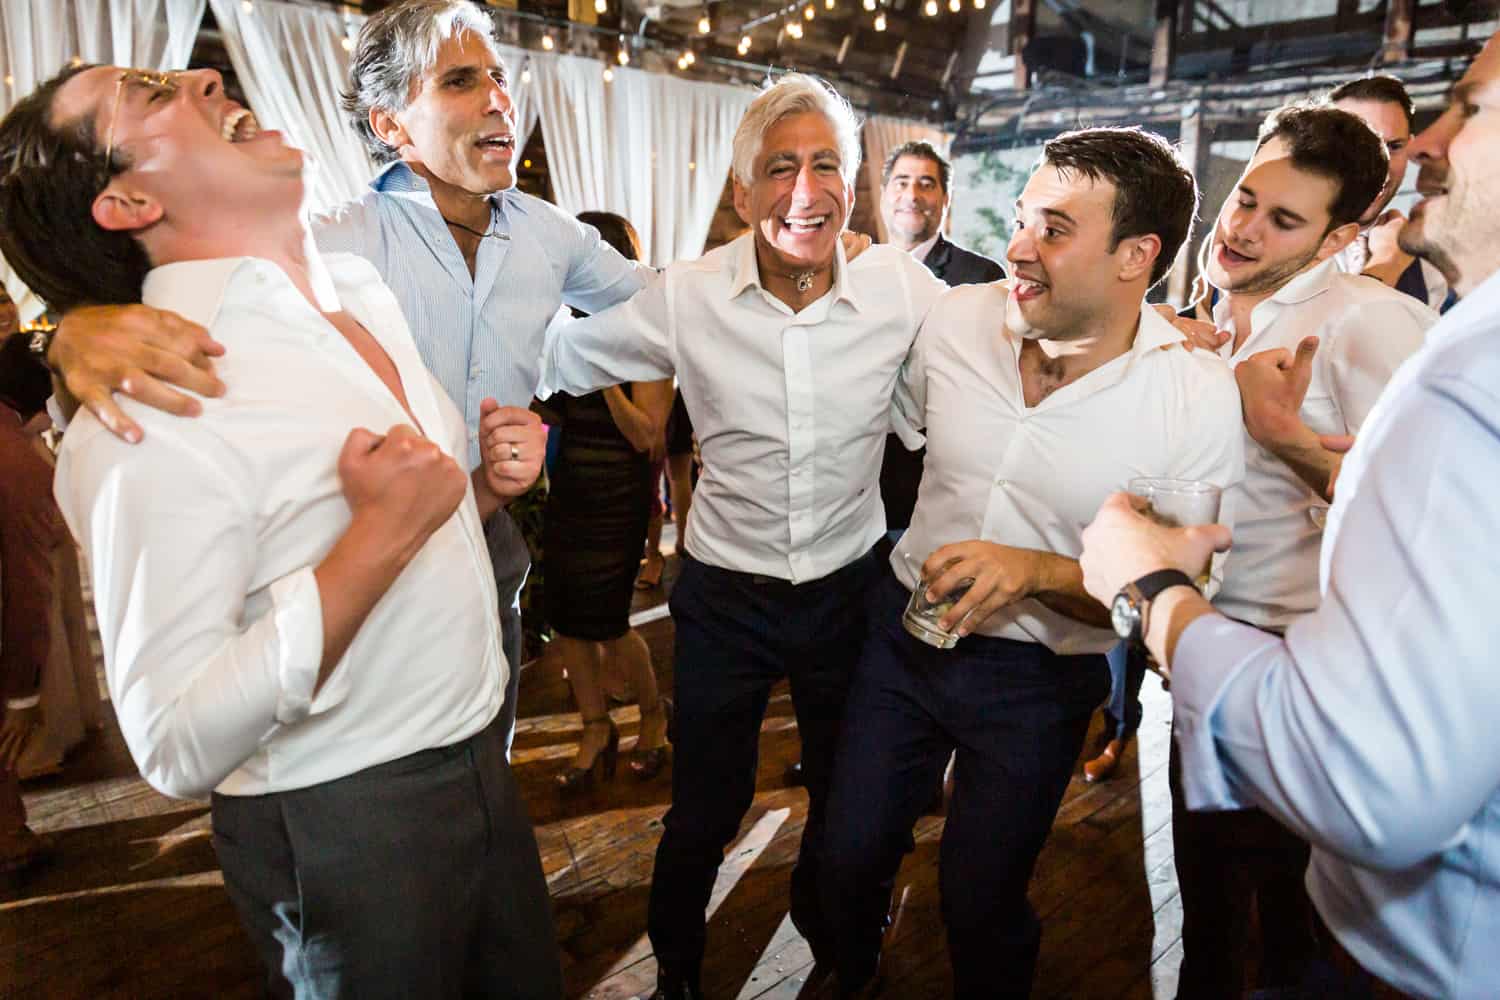 Group of male guests dancing with two grooms at Greenpoint Loft wedding